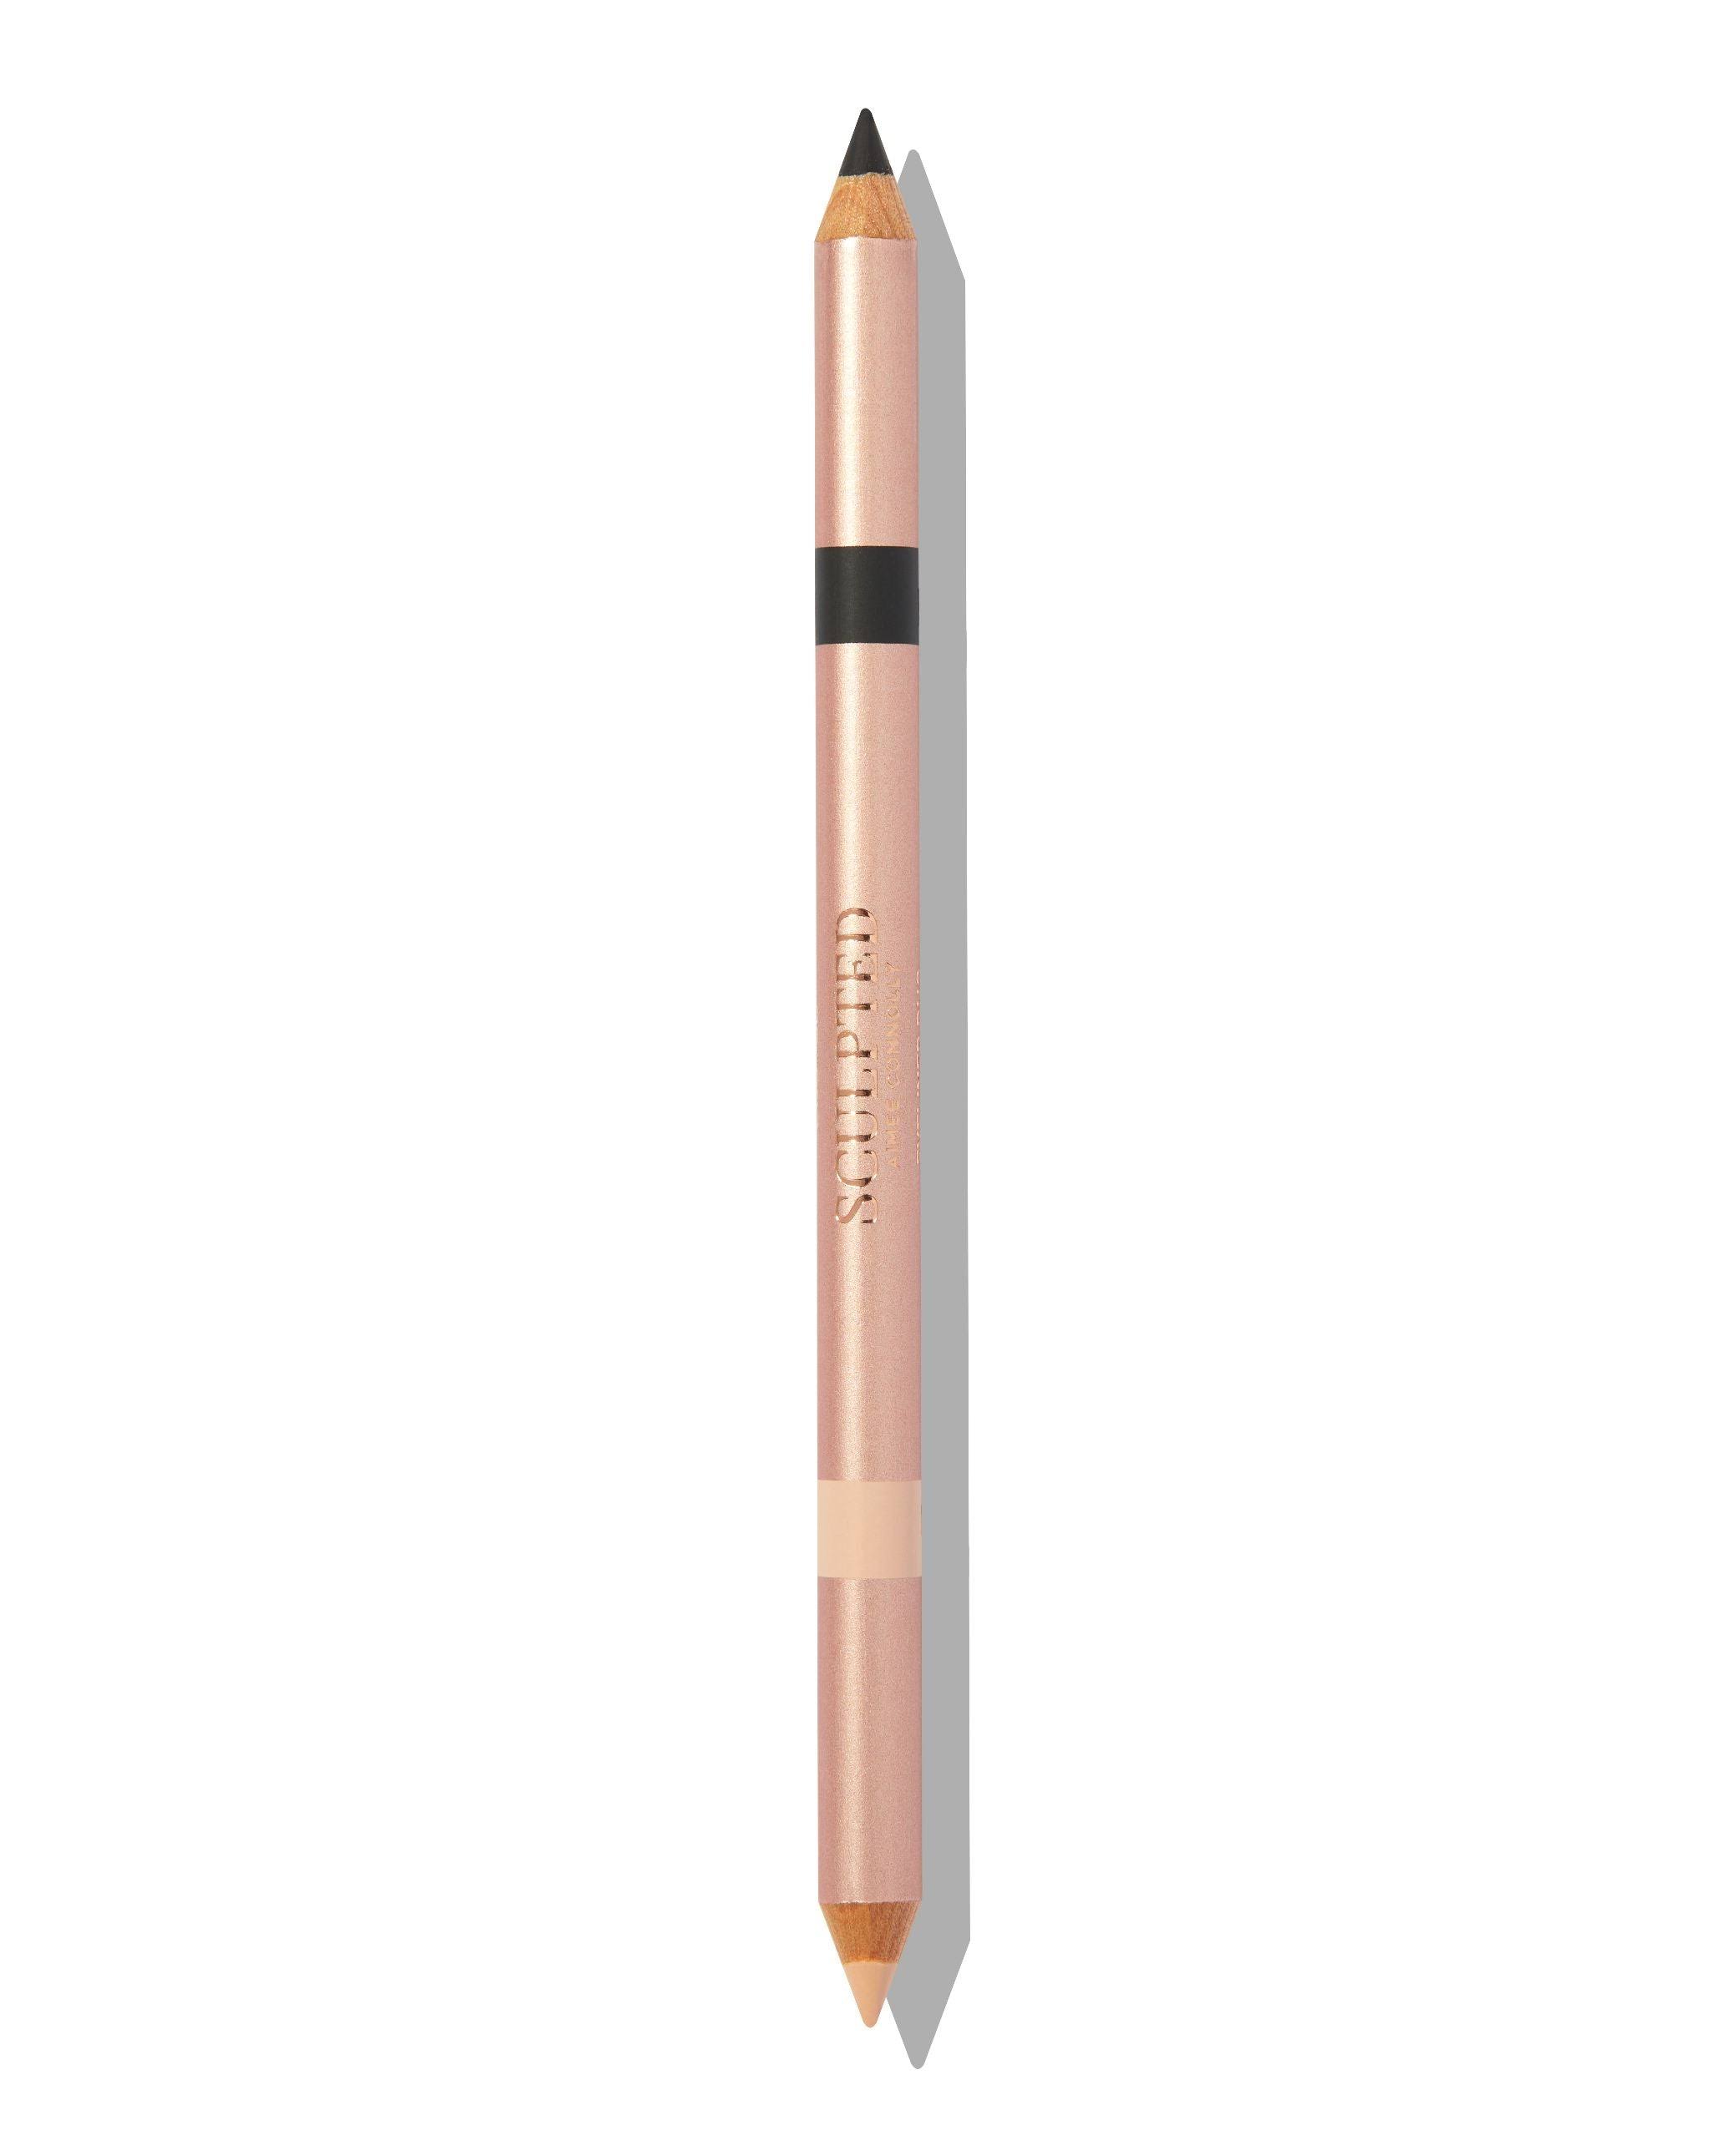 Sculpted By Aimee - Double Ended Kohl Eye Pencil - Black/Nude